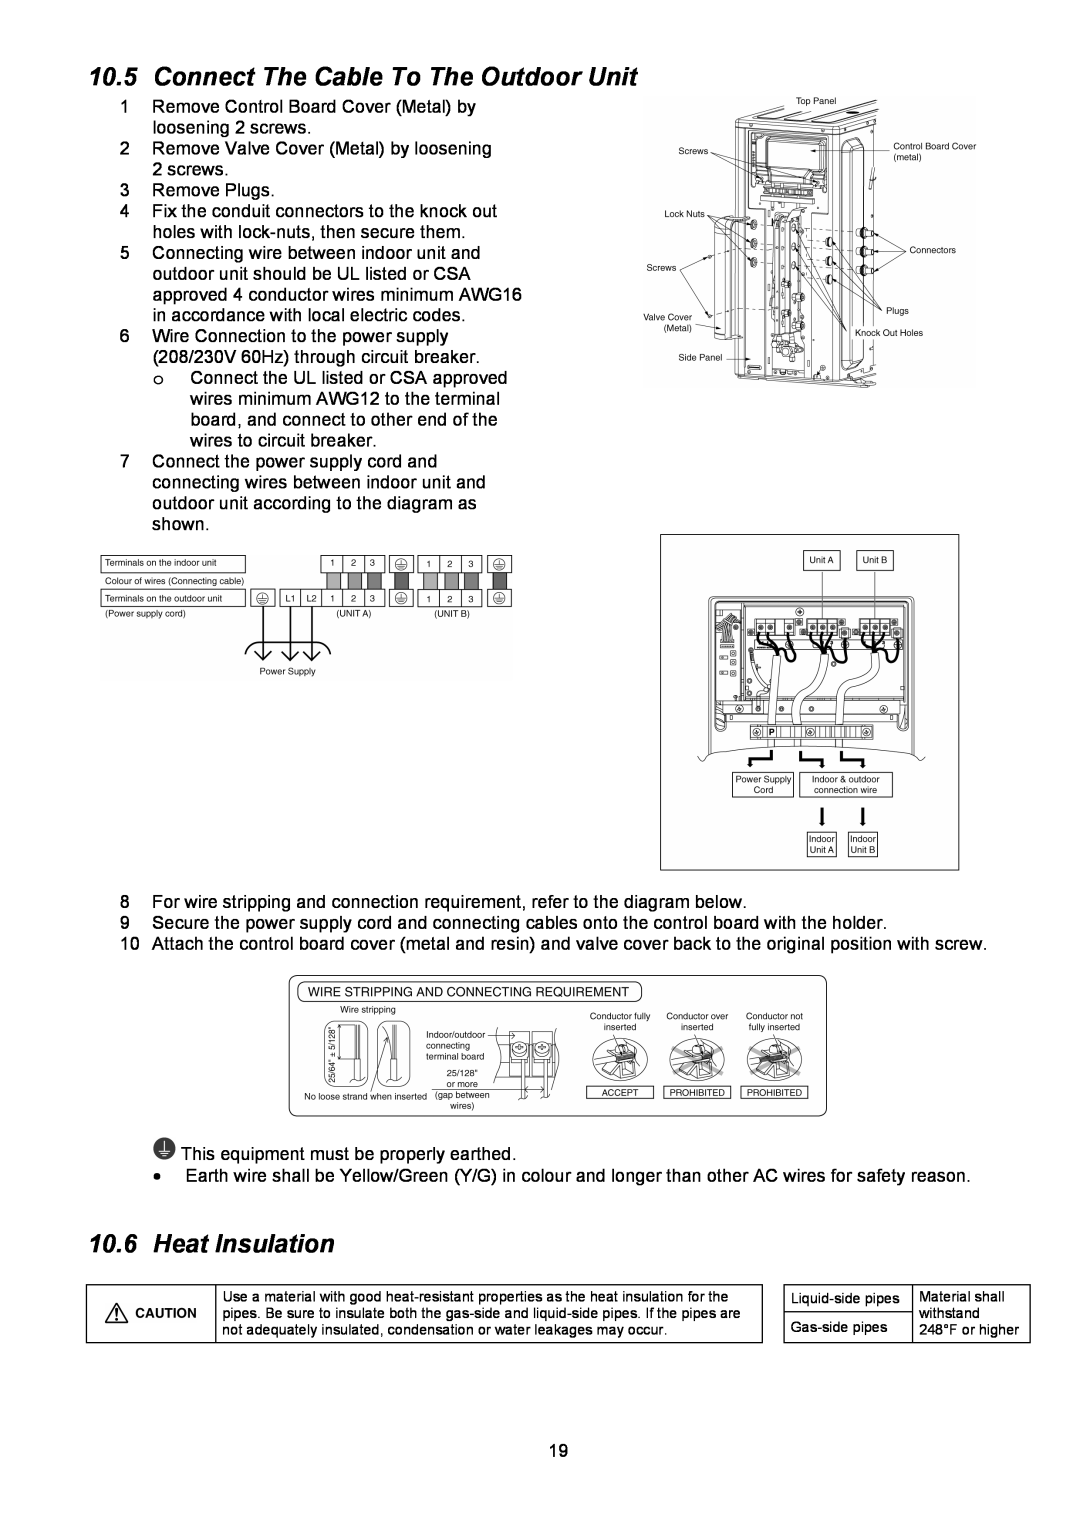 Panasonic CU-2E18NBU service manual Connect The Cable To The Outdoor Unit, Heat Insulation 